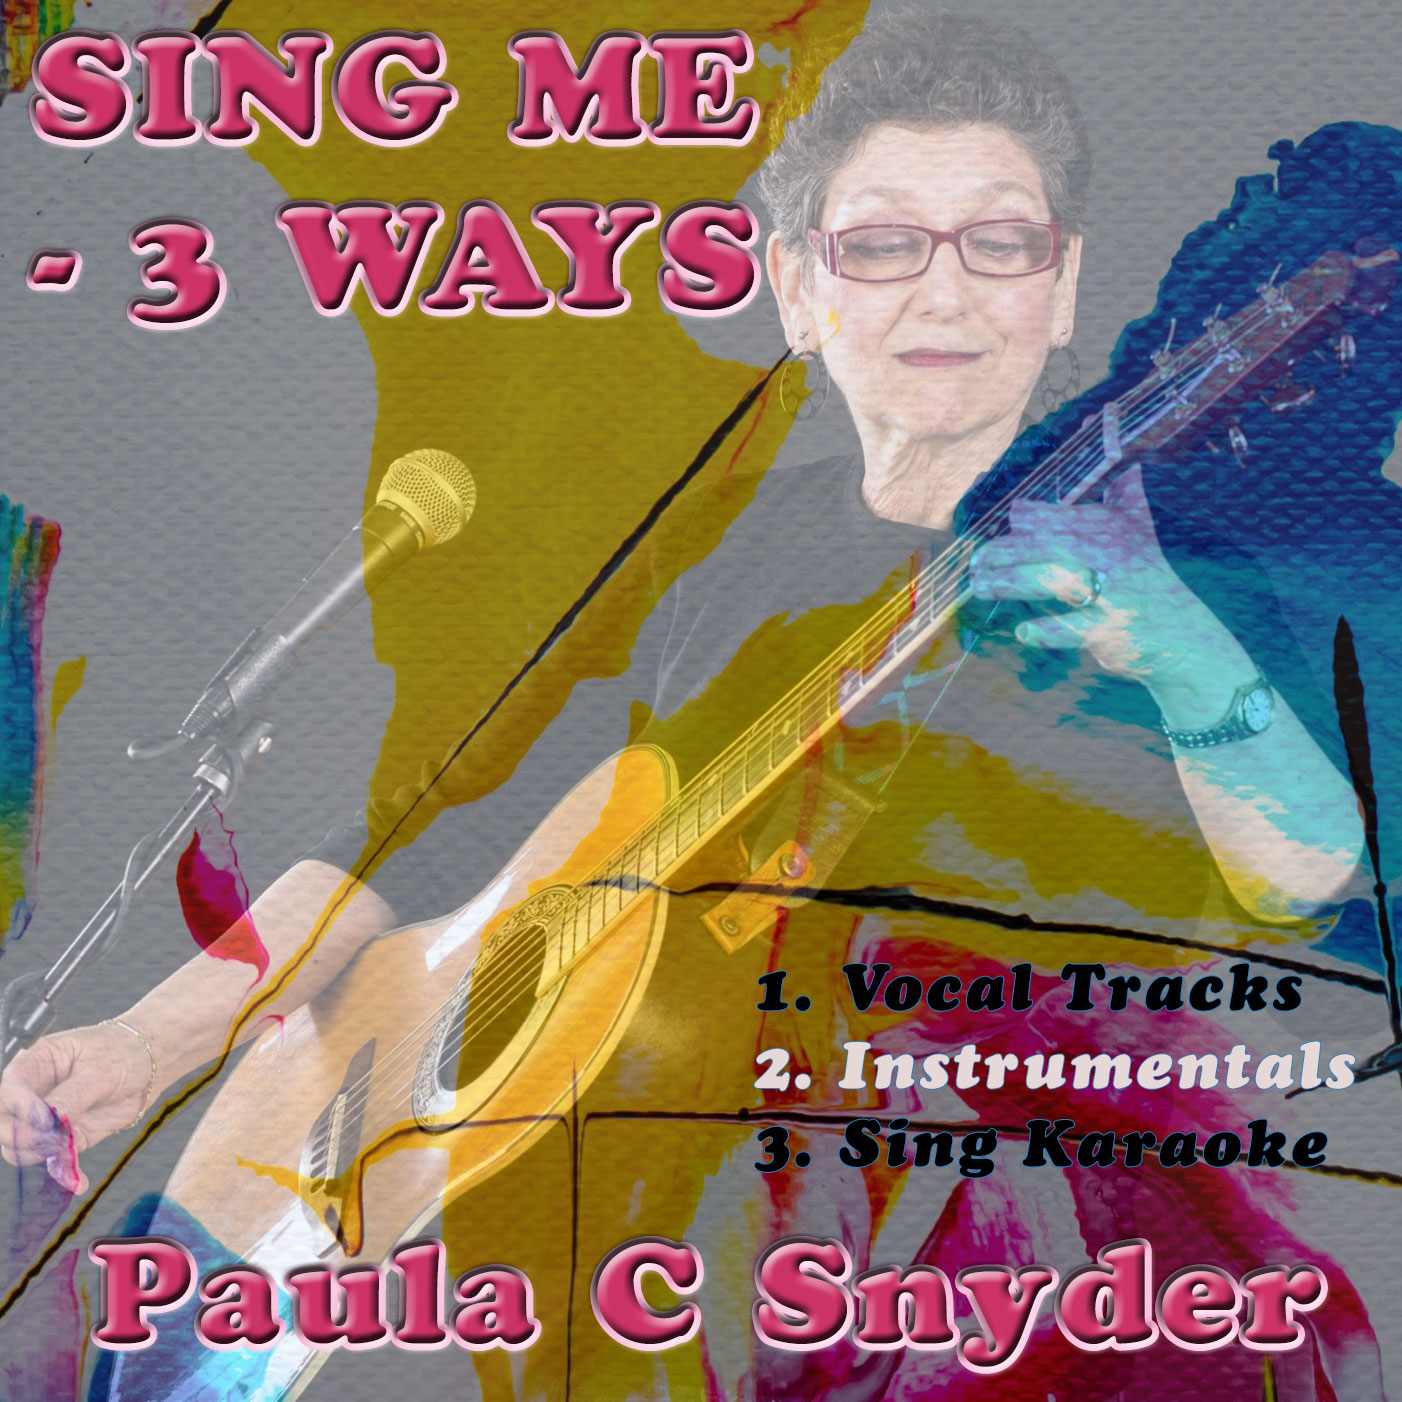 SING ME 3 WAYS COVER FRONT INSTRUM SET3 13 23